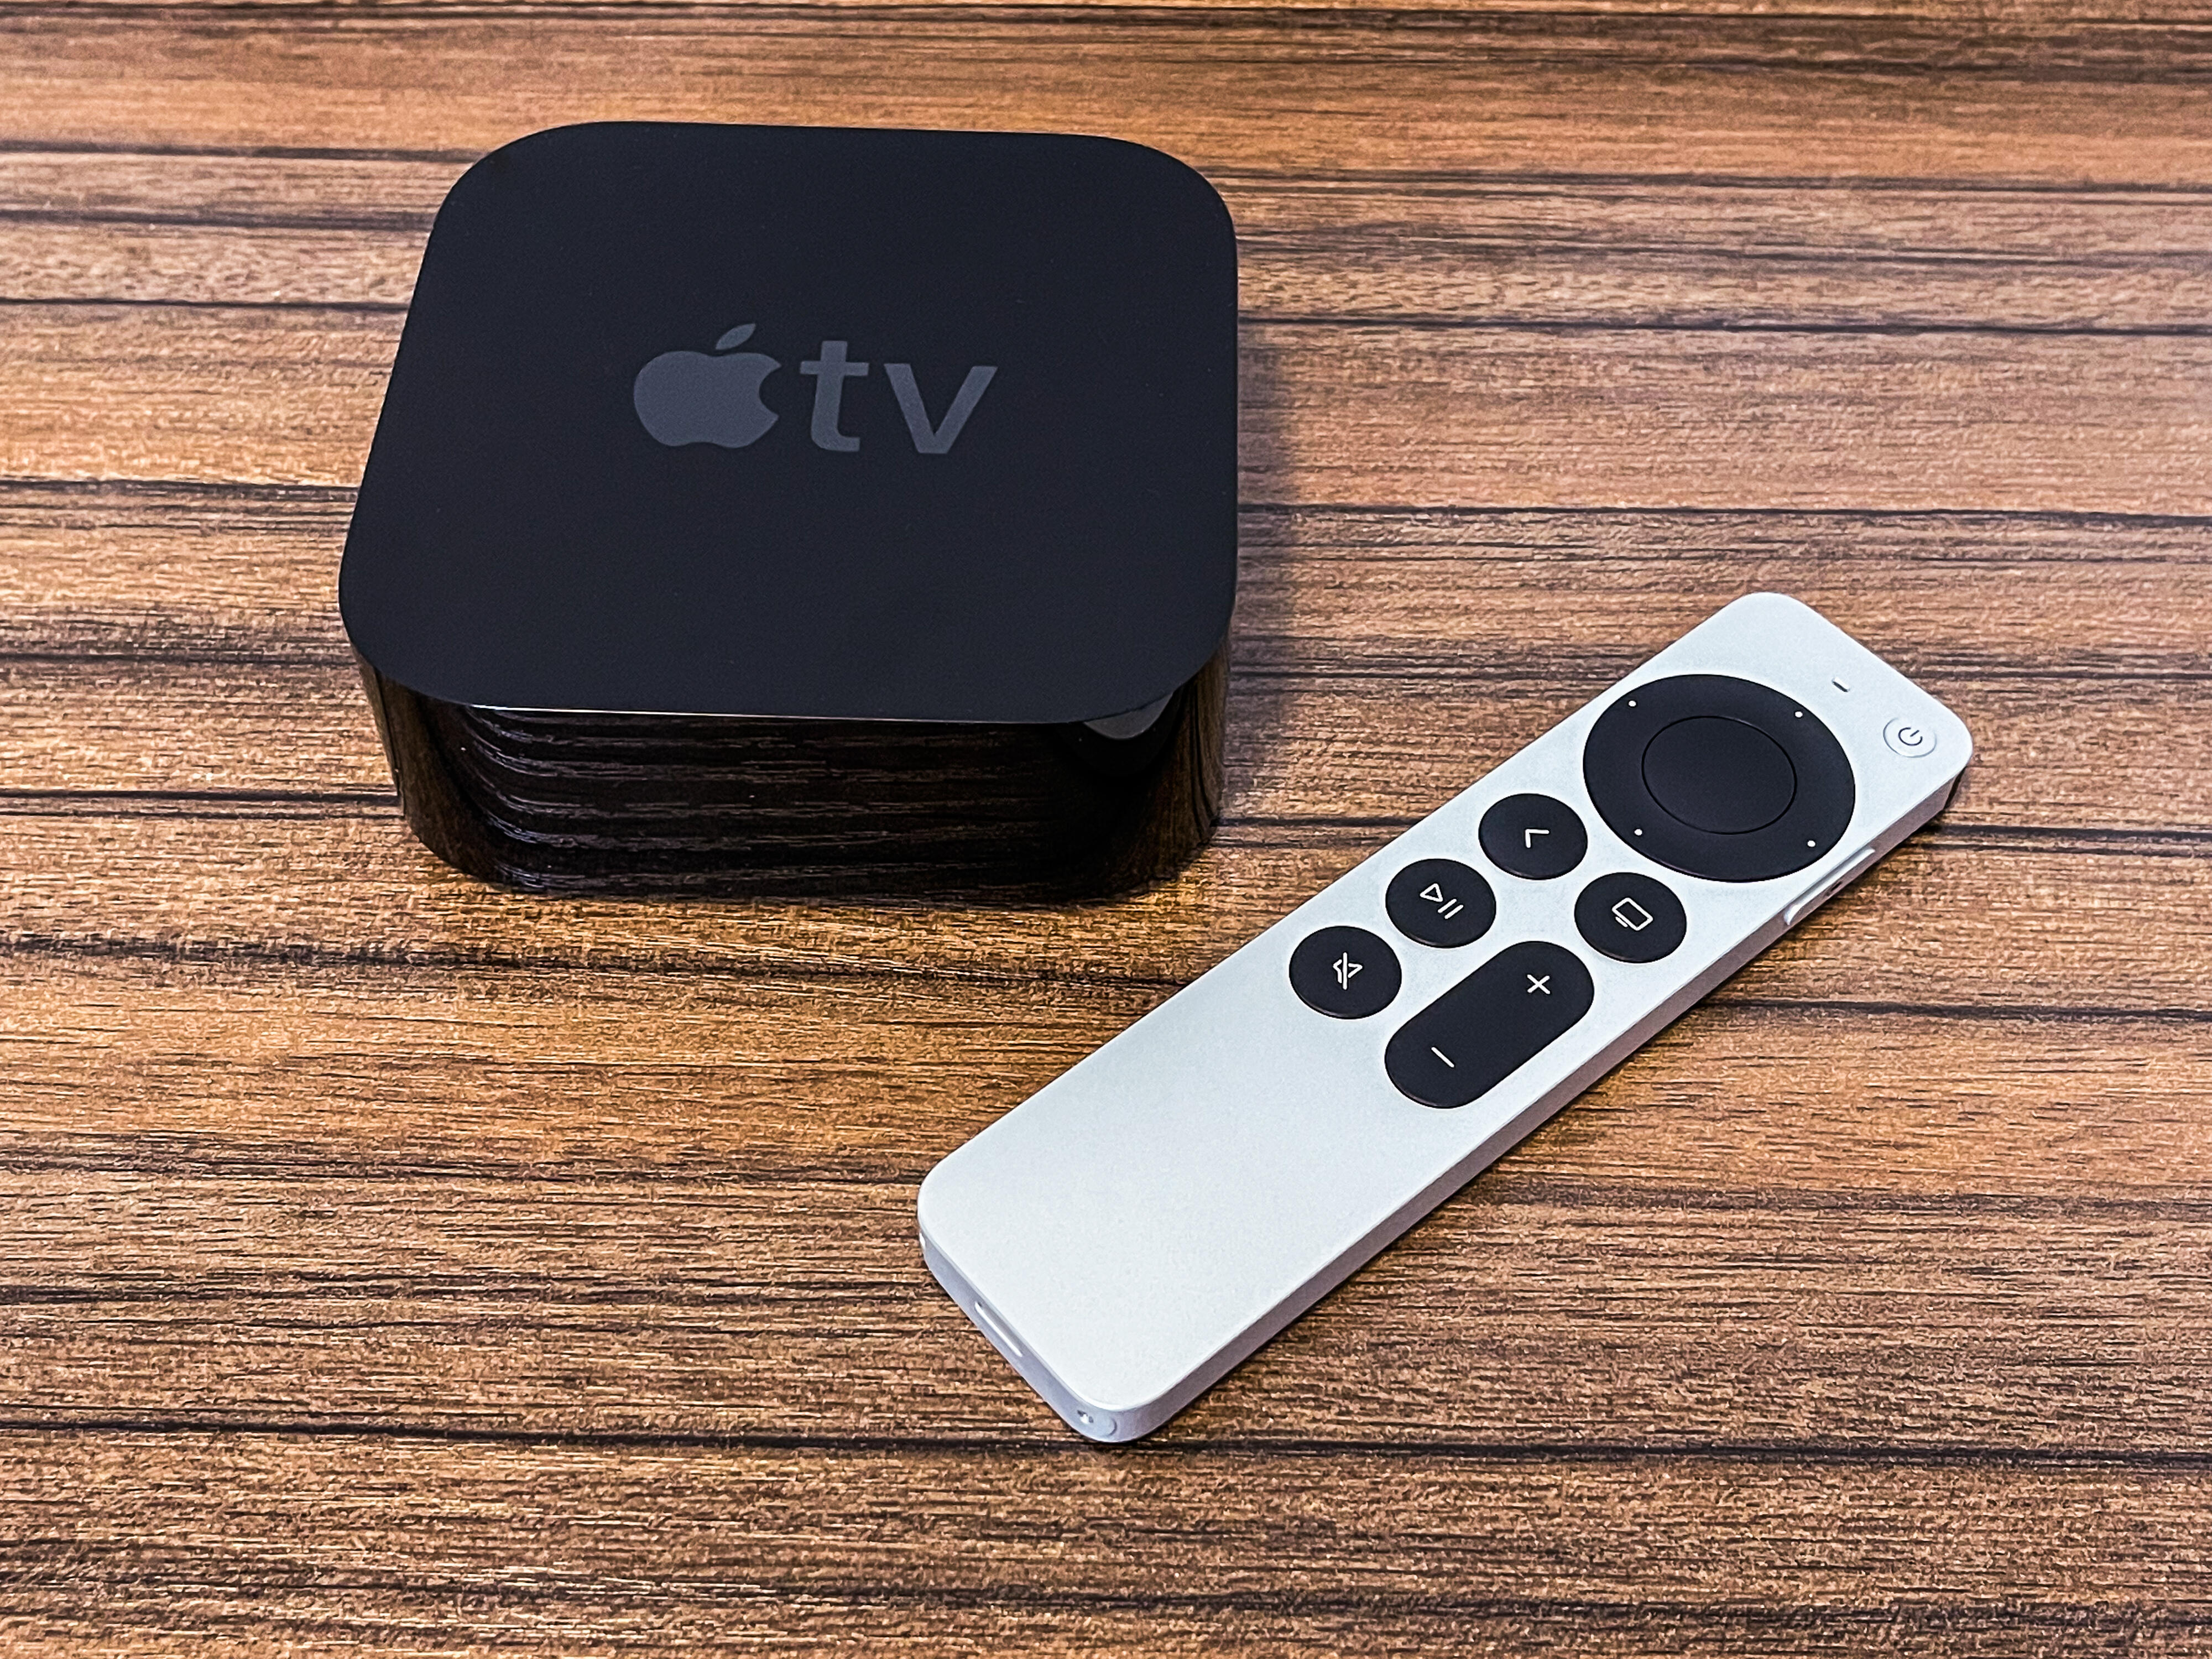 Tranquility lykke håndled Apple TV 4K (2021) review: New remote can't make up for high price - CNET